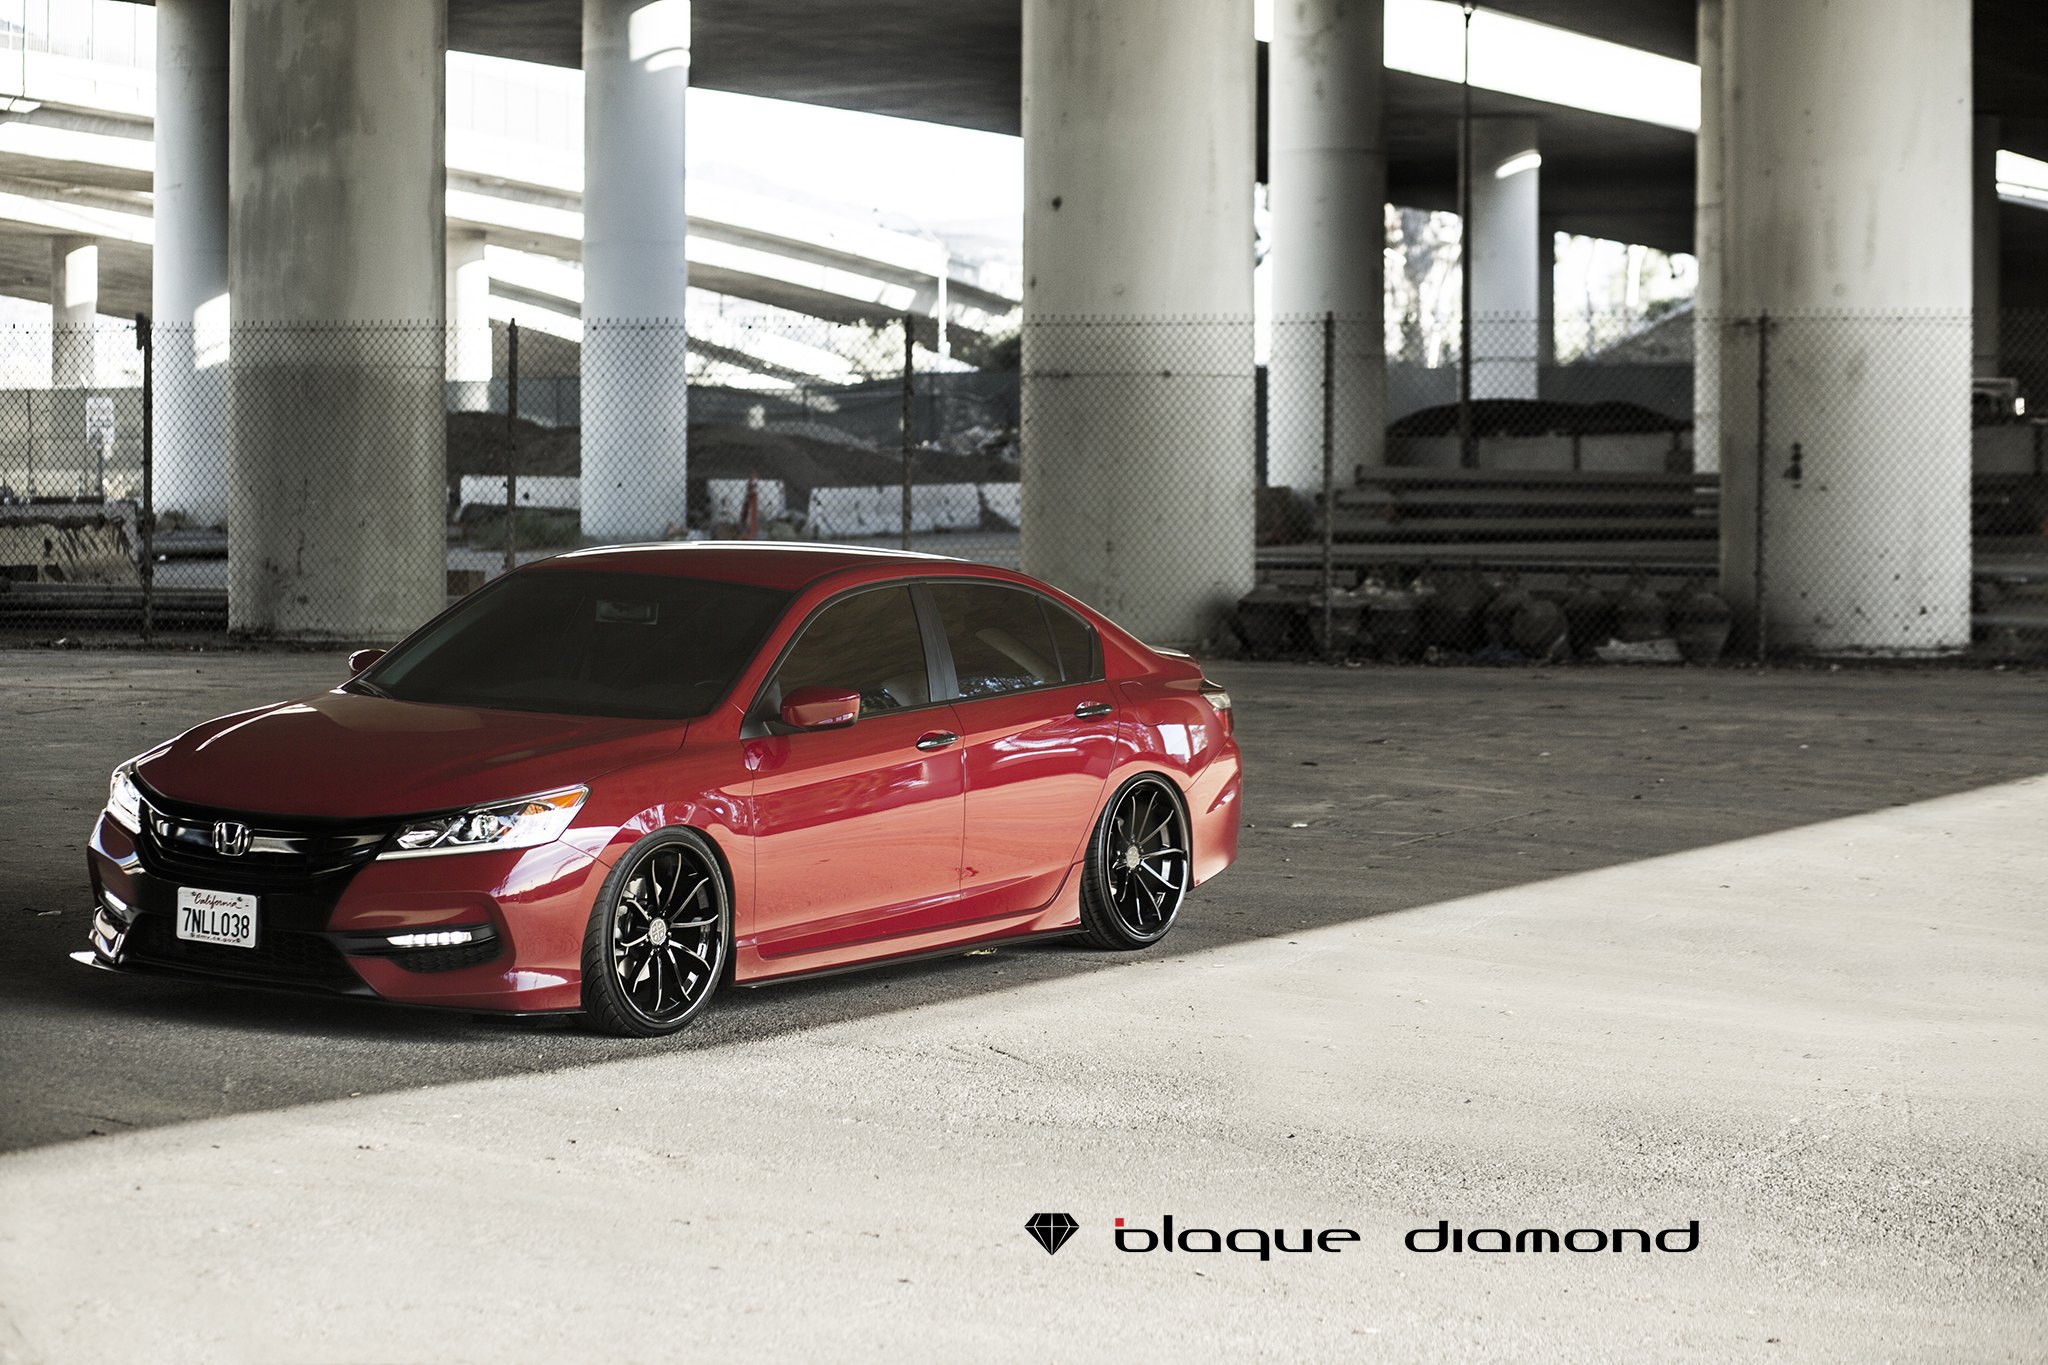 Front Bumper with LED Lights on Red Honda Accord - Photo by Blaque Diamond Wheels